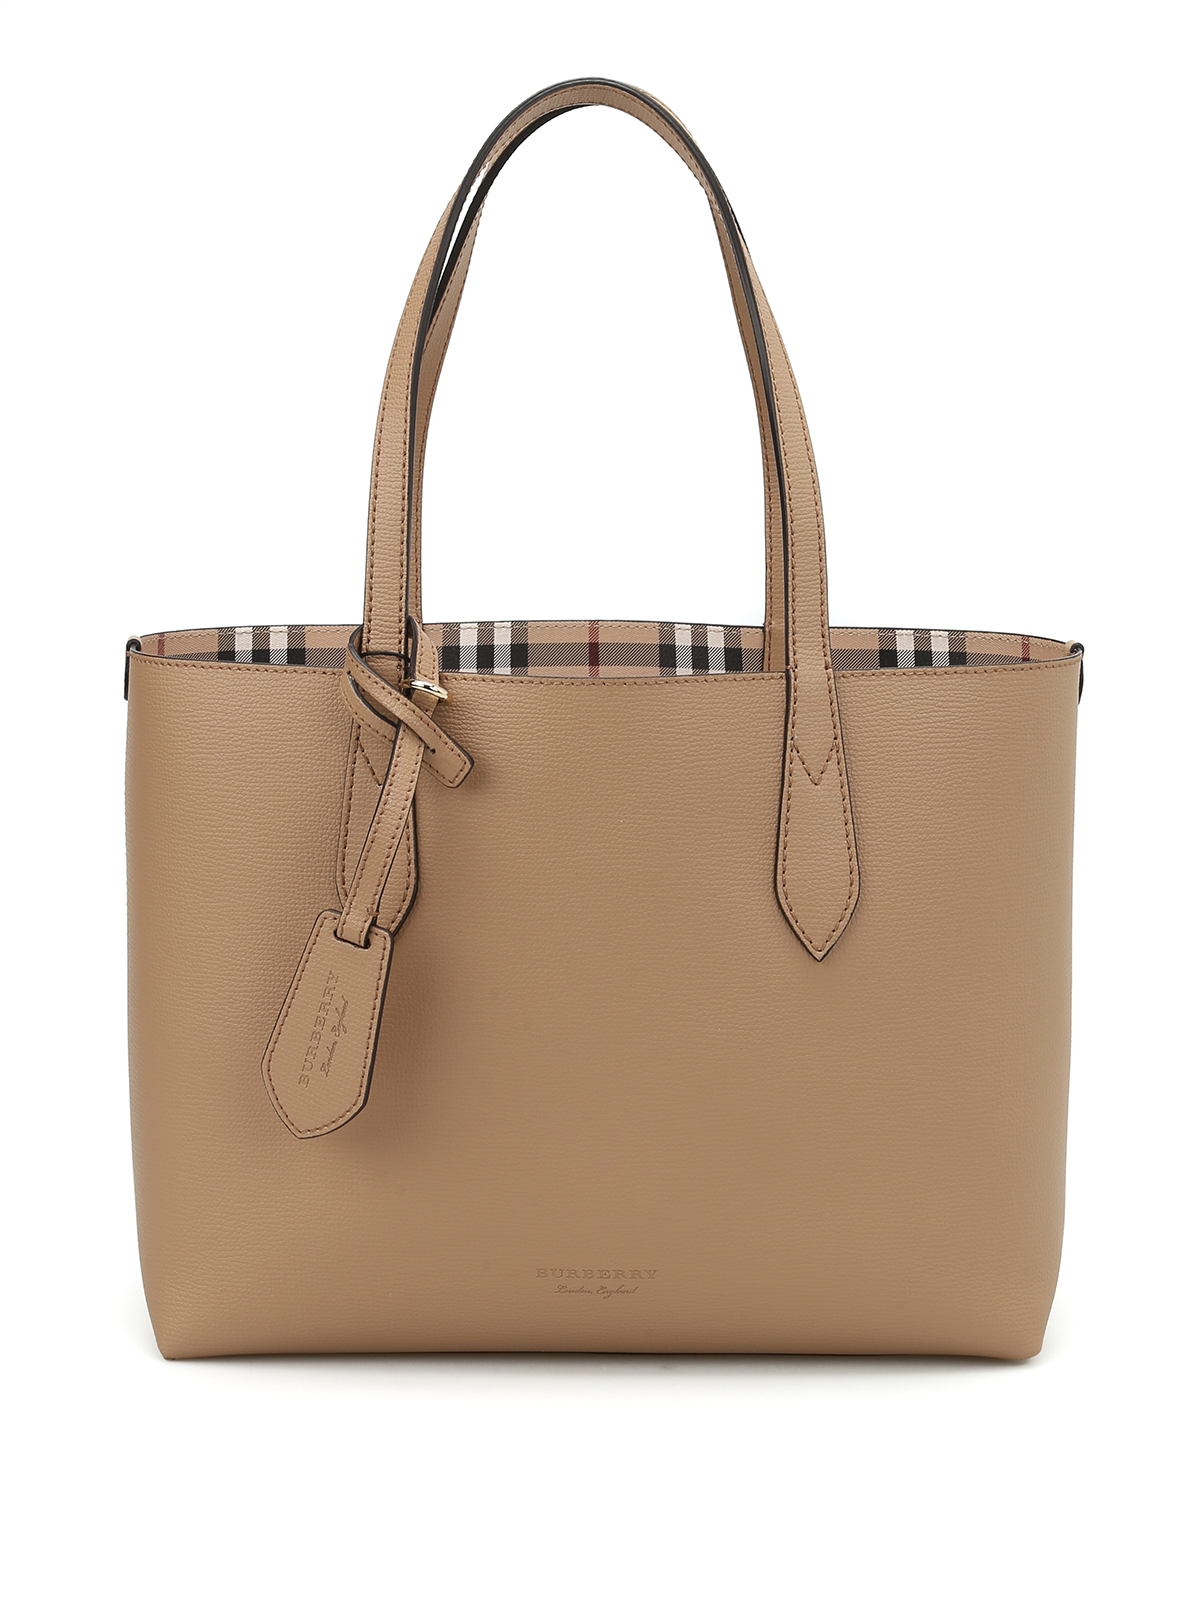 Burberry - Haymarket check reversible tote - totes bags - 4049585